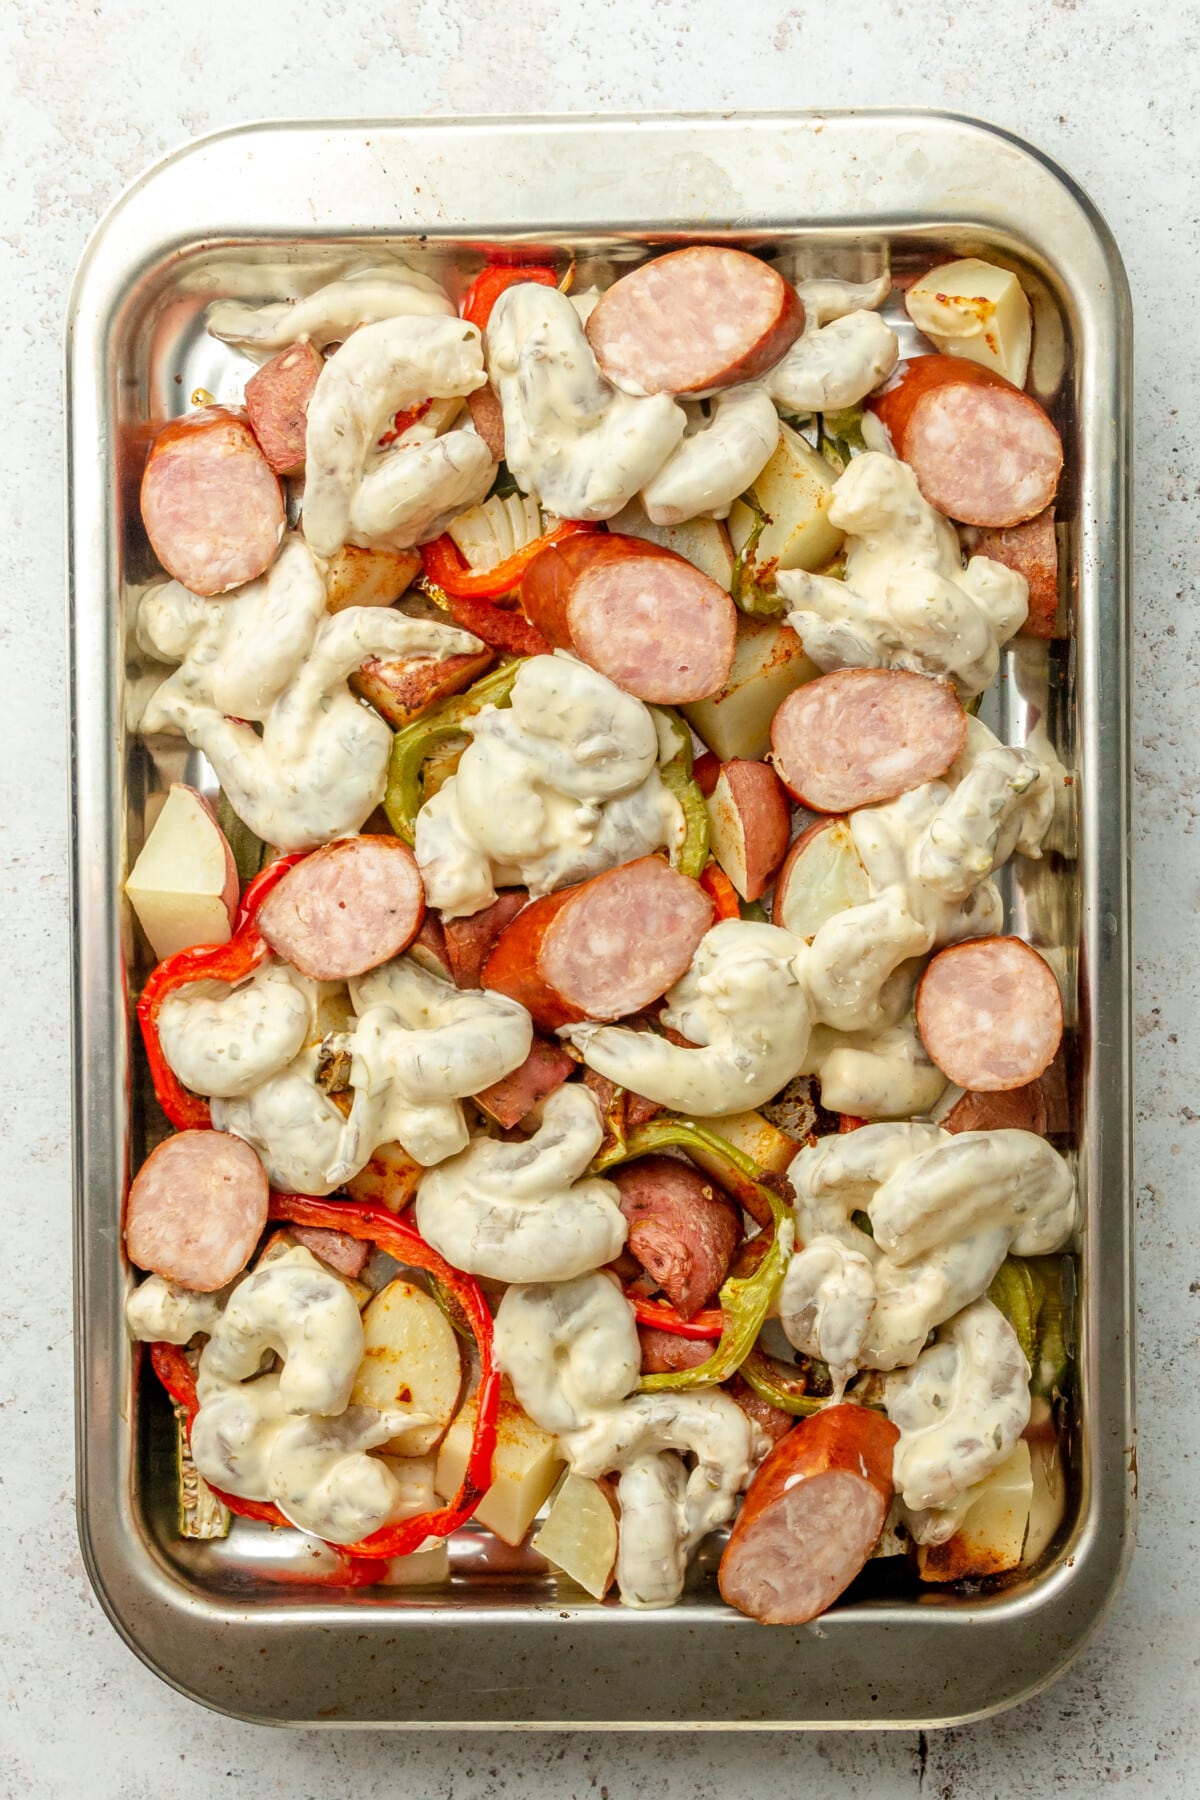 Shrimp coated in a remoulade sauce and andouille sausage pieces sit on top of roasted vegetables on a rimmed stainless steel baking sheet on a light grey surface.